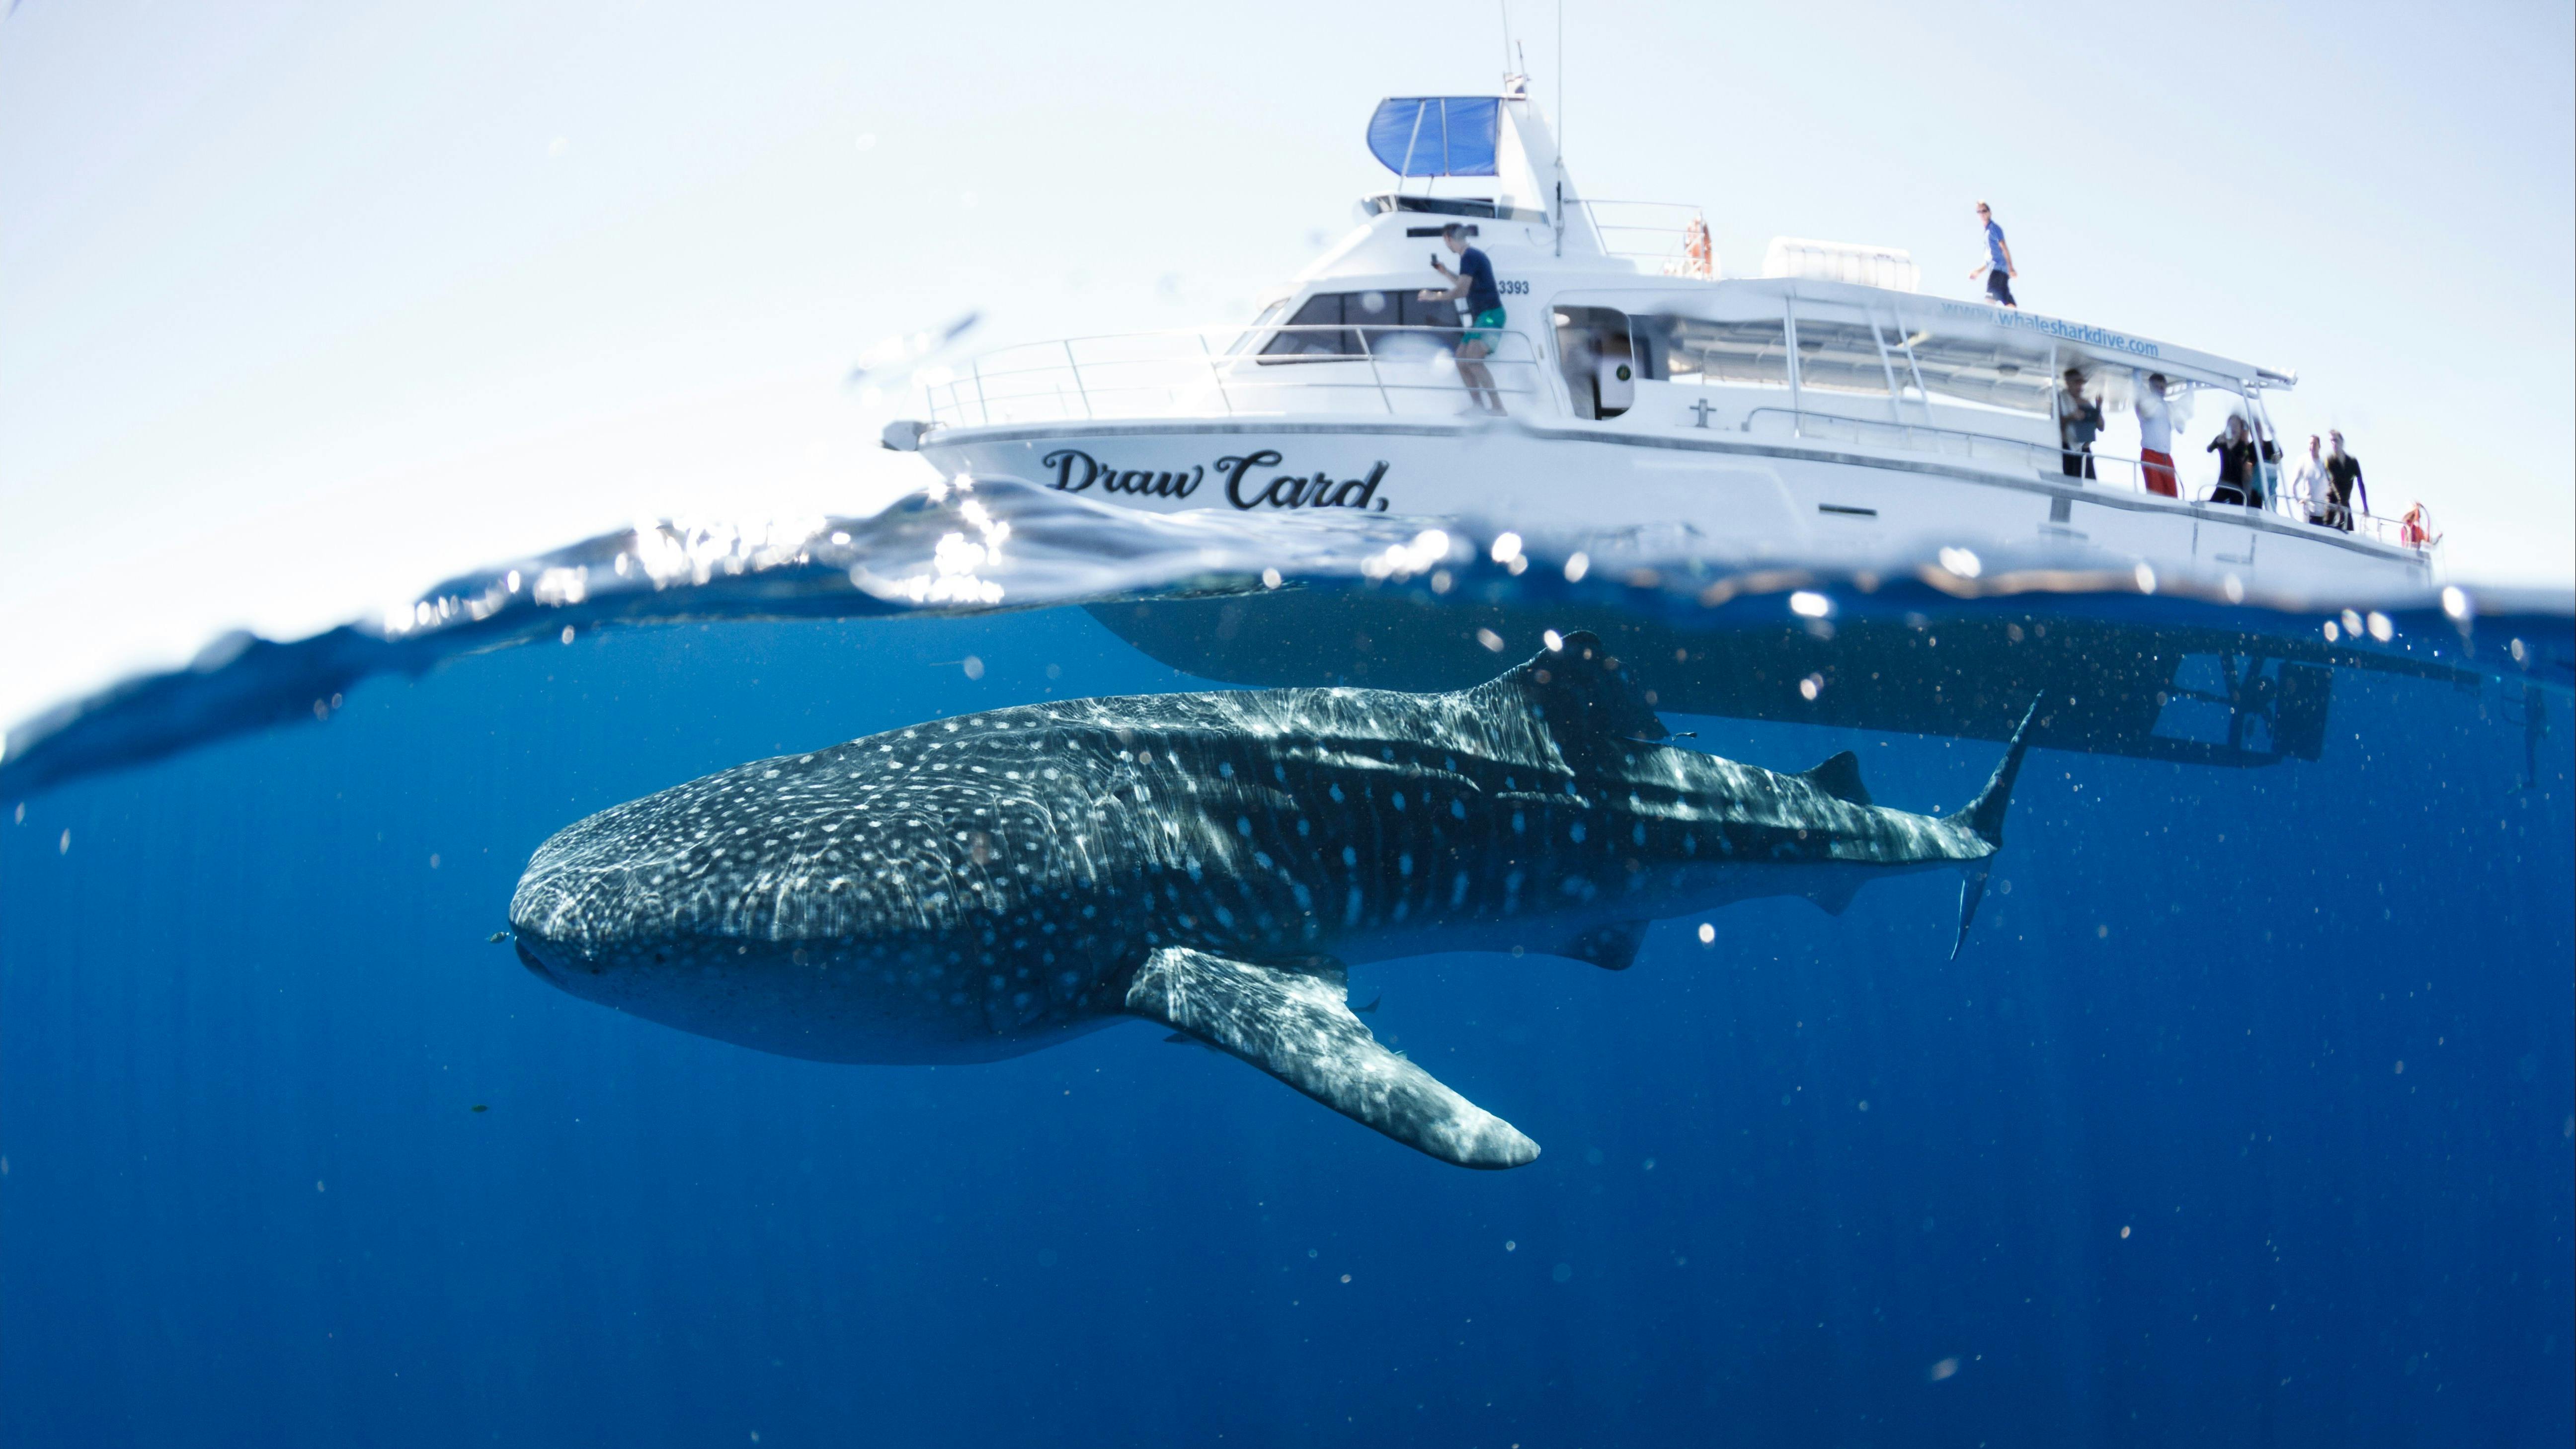 Whale sharks thriving in waters off Australia